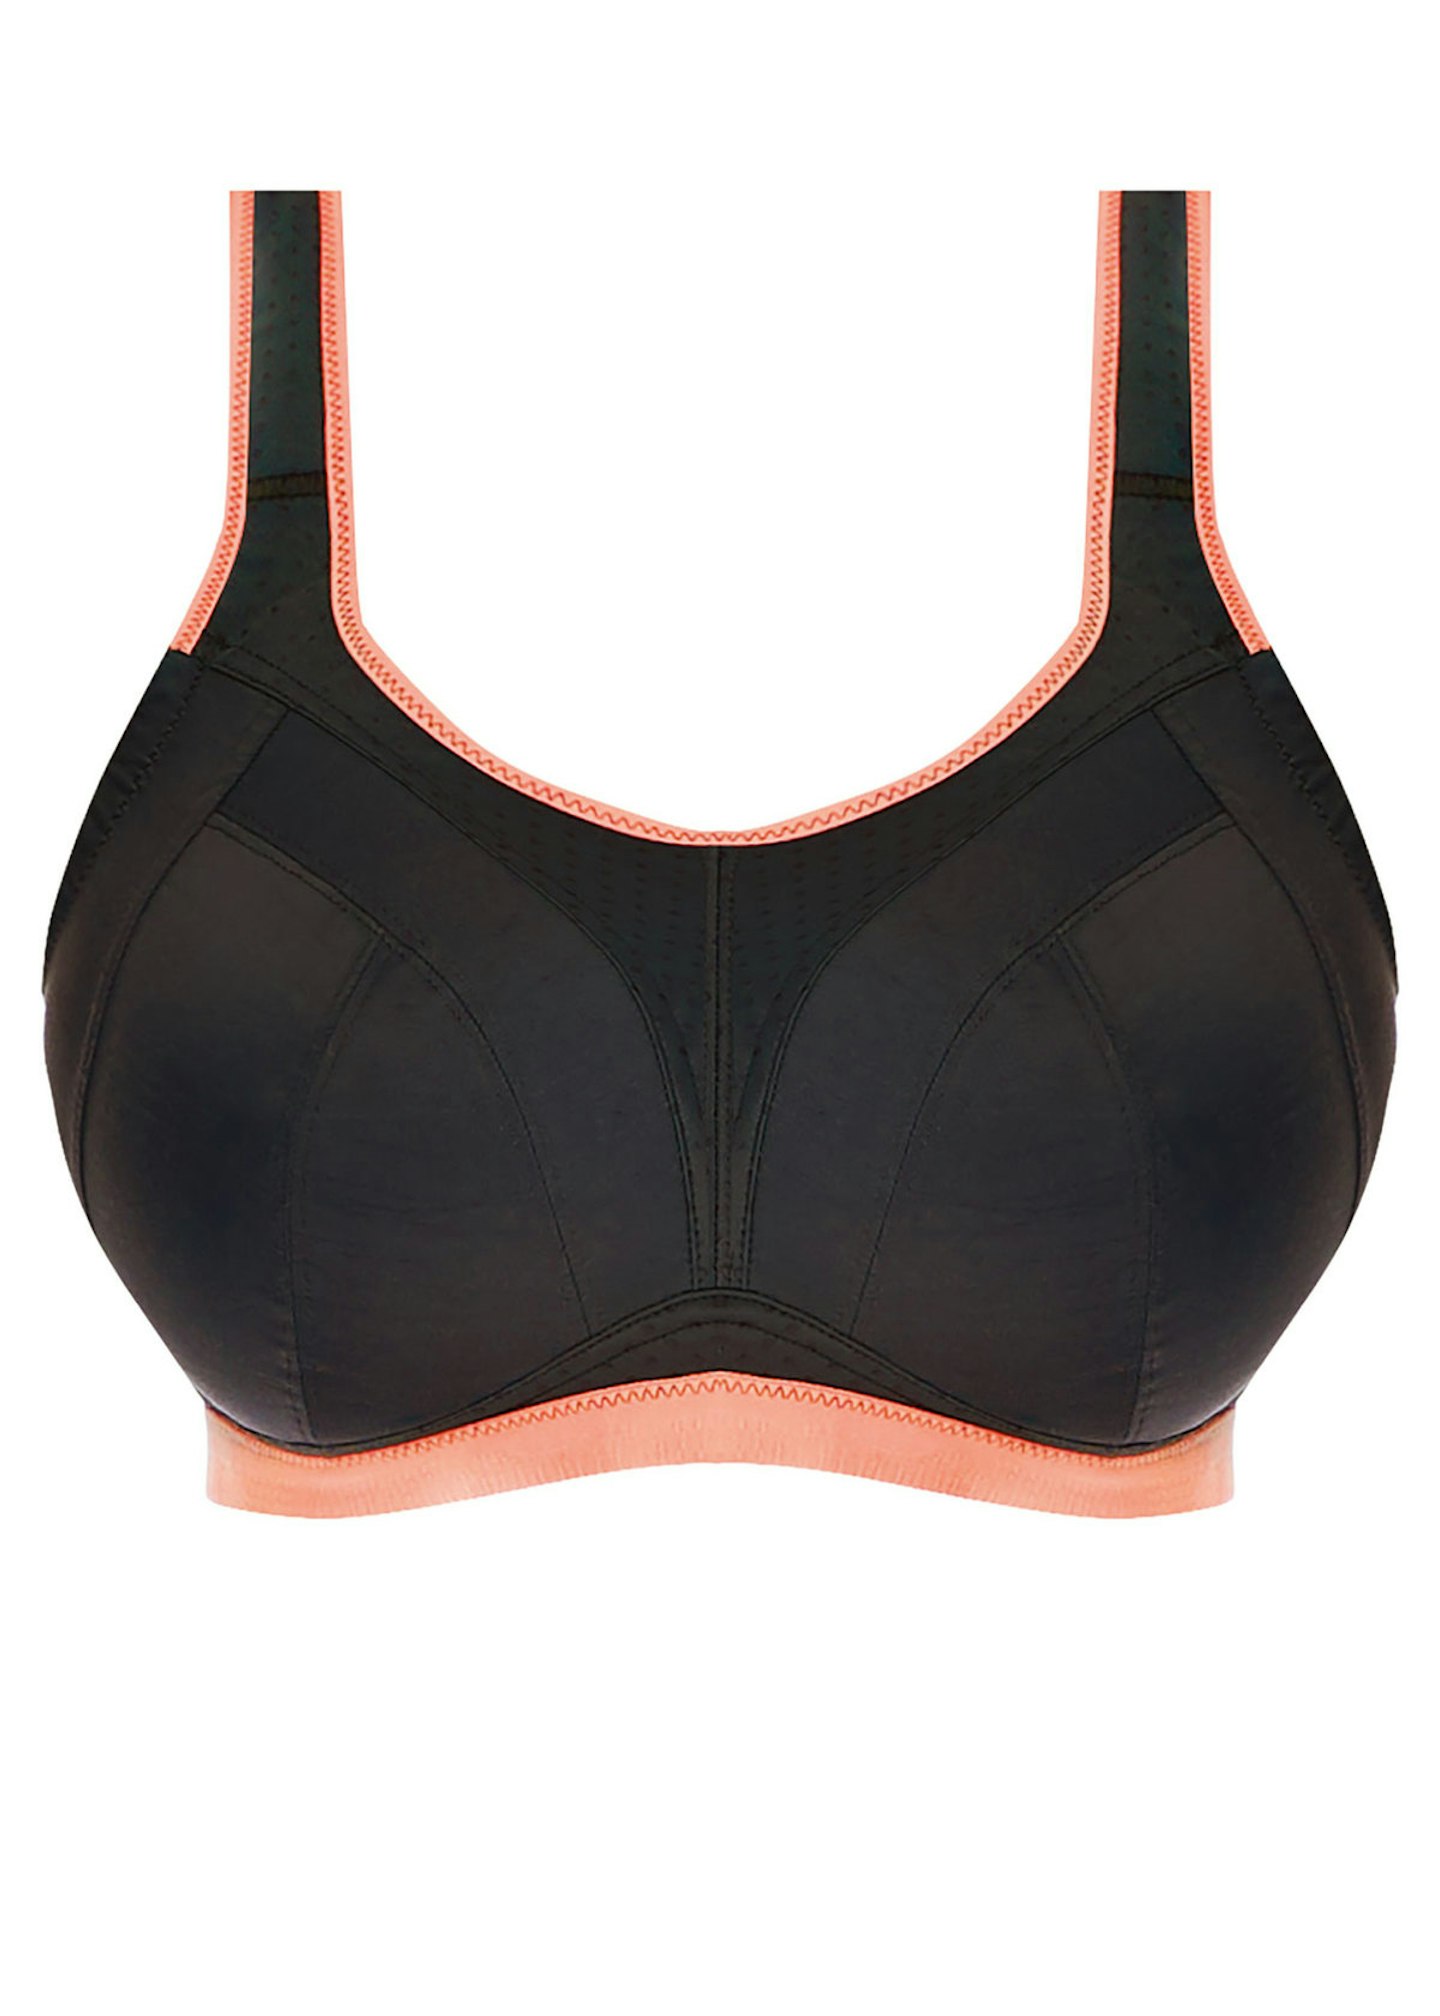 The Best Sports Bras For Big Boobs